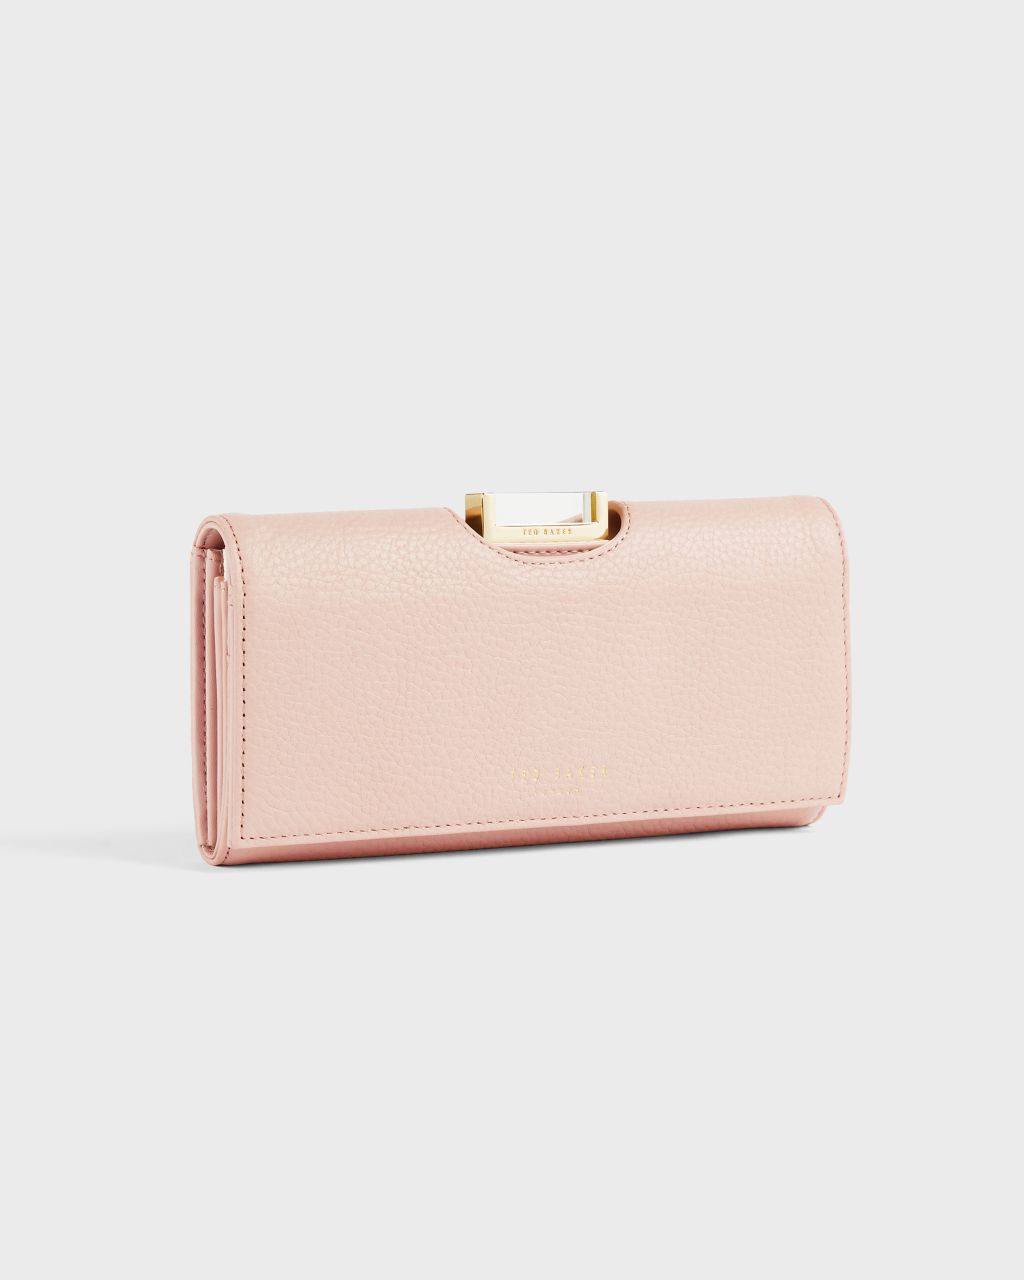 Ted Baker Women's Large Bobble Purse in Pale Pink, Bita, Leather